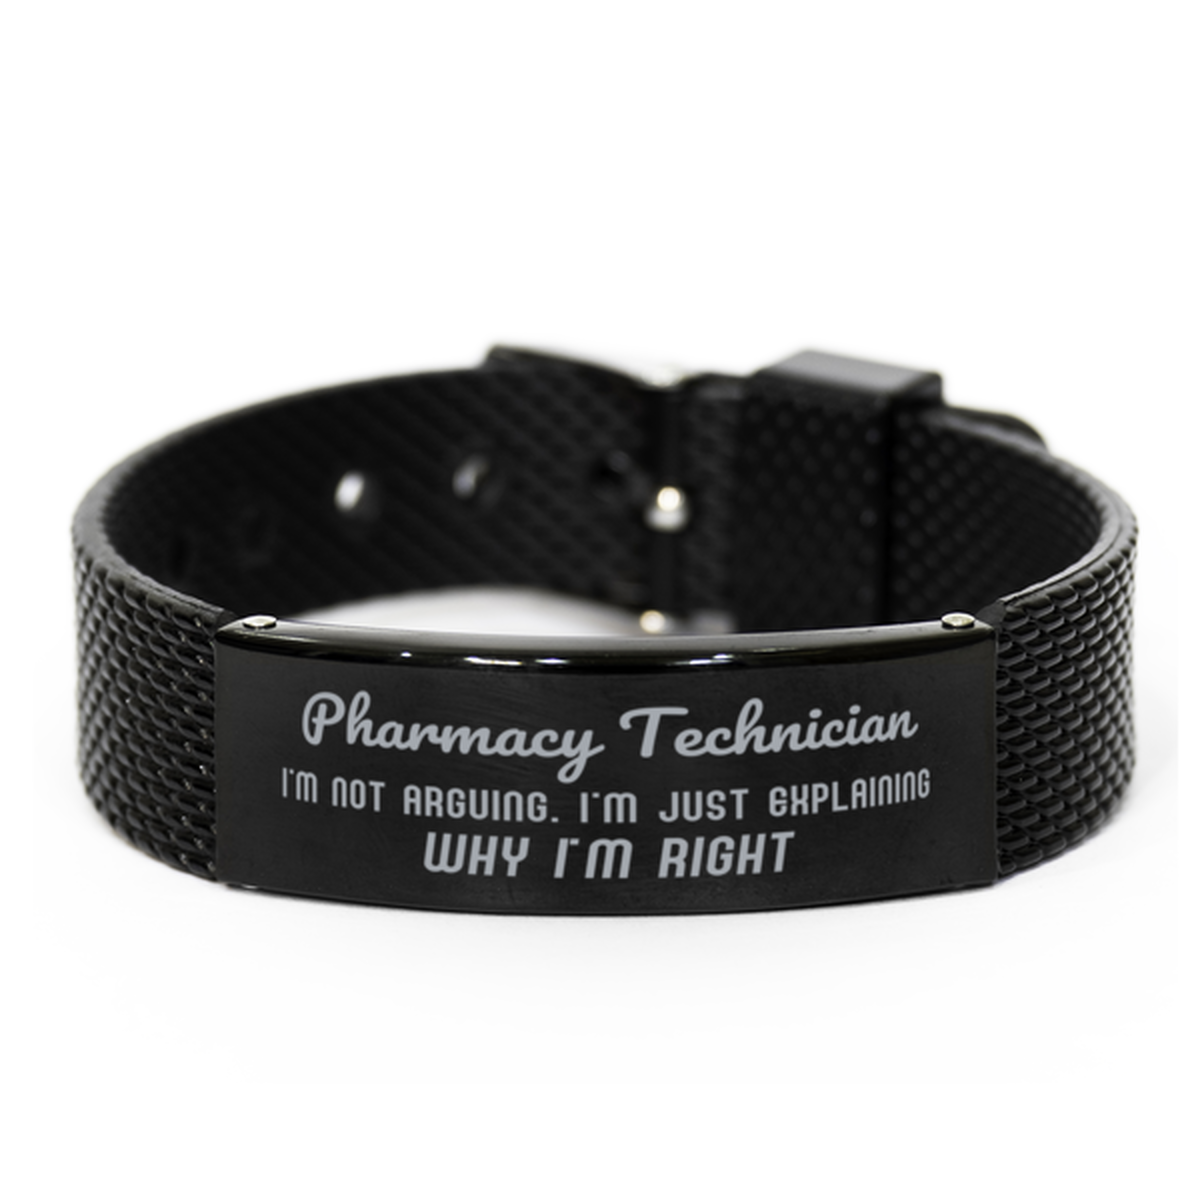 Pharmacy Technician I'm not Arguing. I'm Just Explaining Why I'm RIGHT Black Shark Mesh Bracelet, Funny Saying Quote Pharmacy Technician Gifts For Pharmacy Technician Graduation Birthday Christmas Gifts for Men Women Coworker